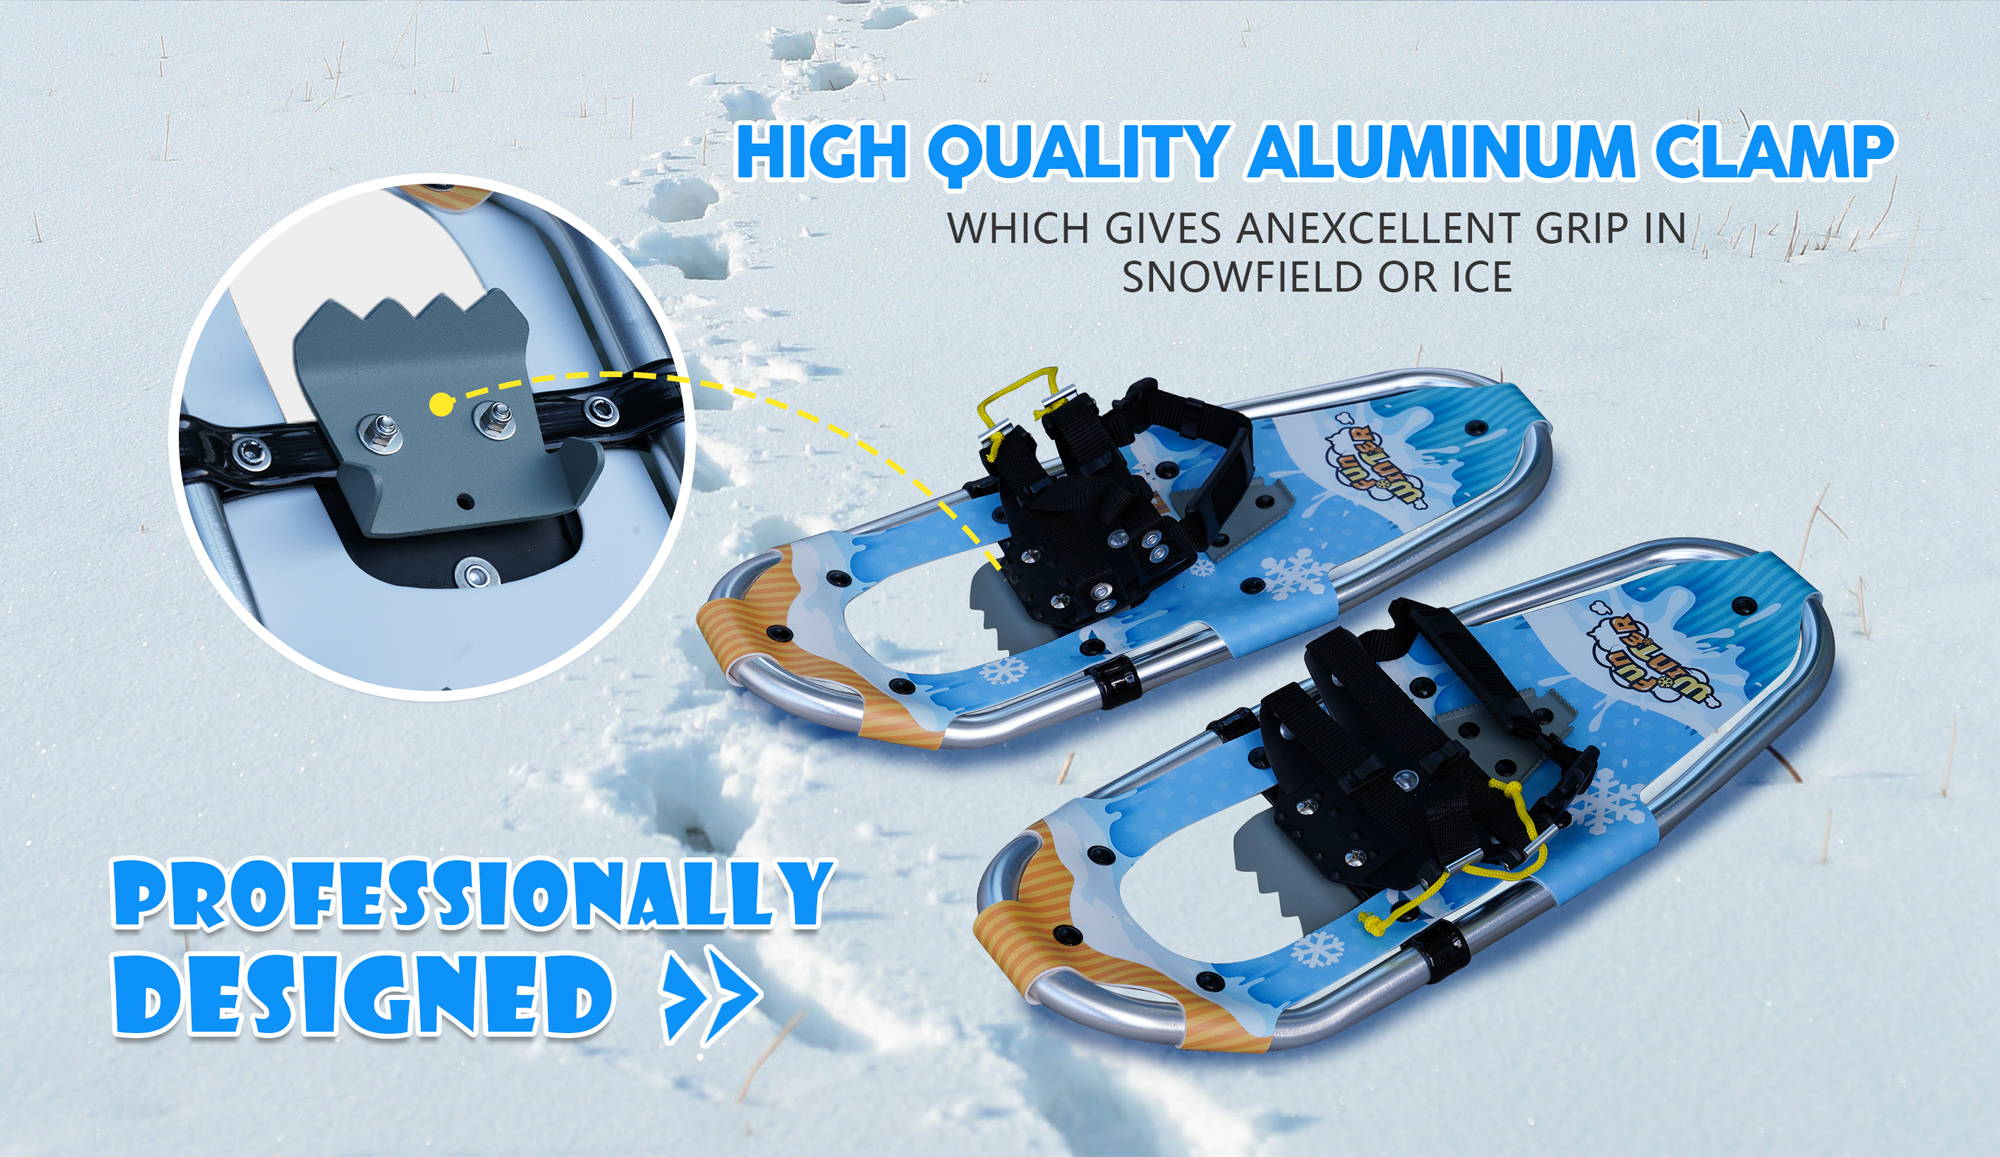 Key features and benefits of Snowshoes for children